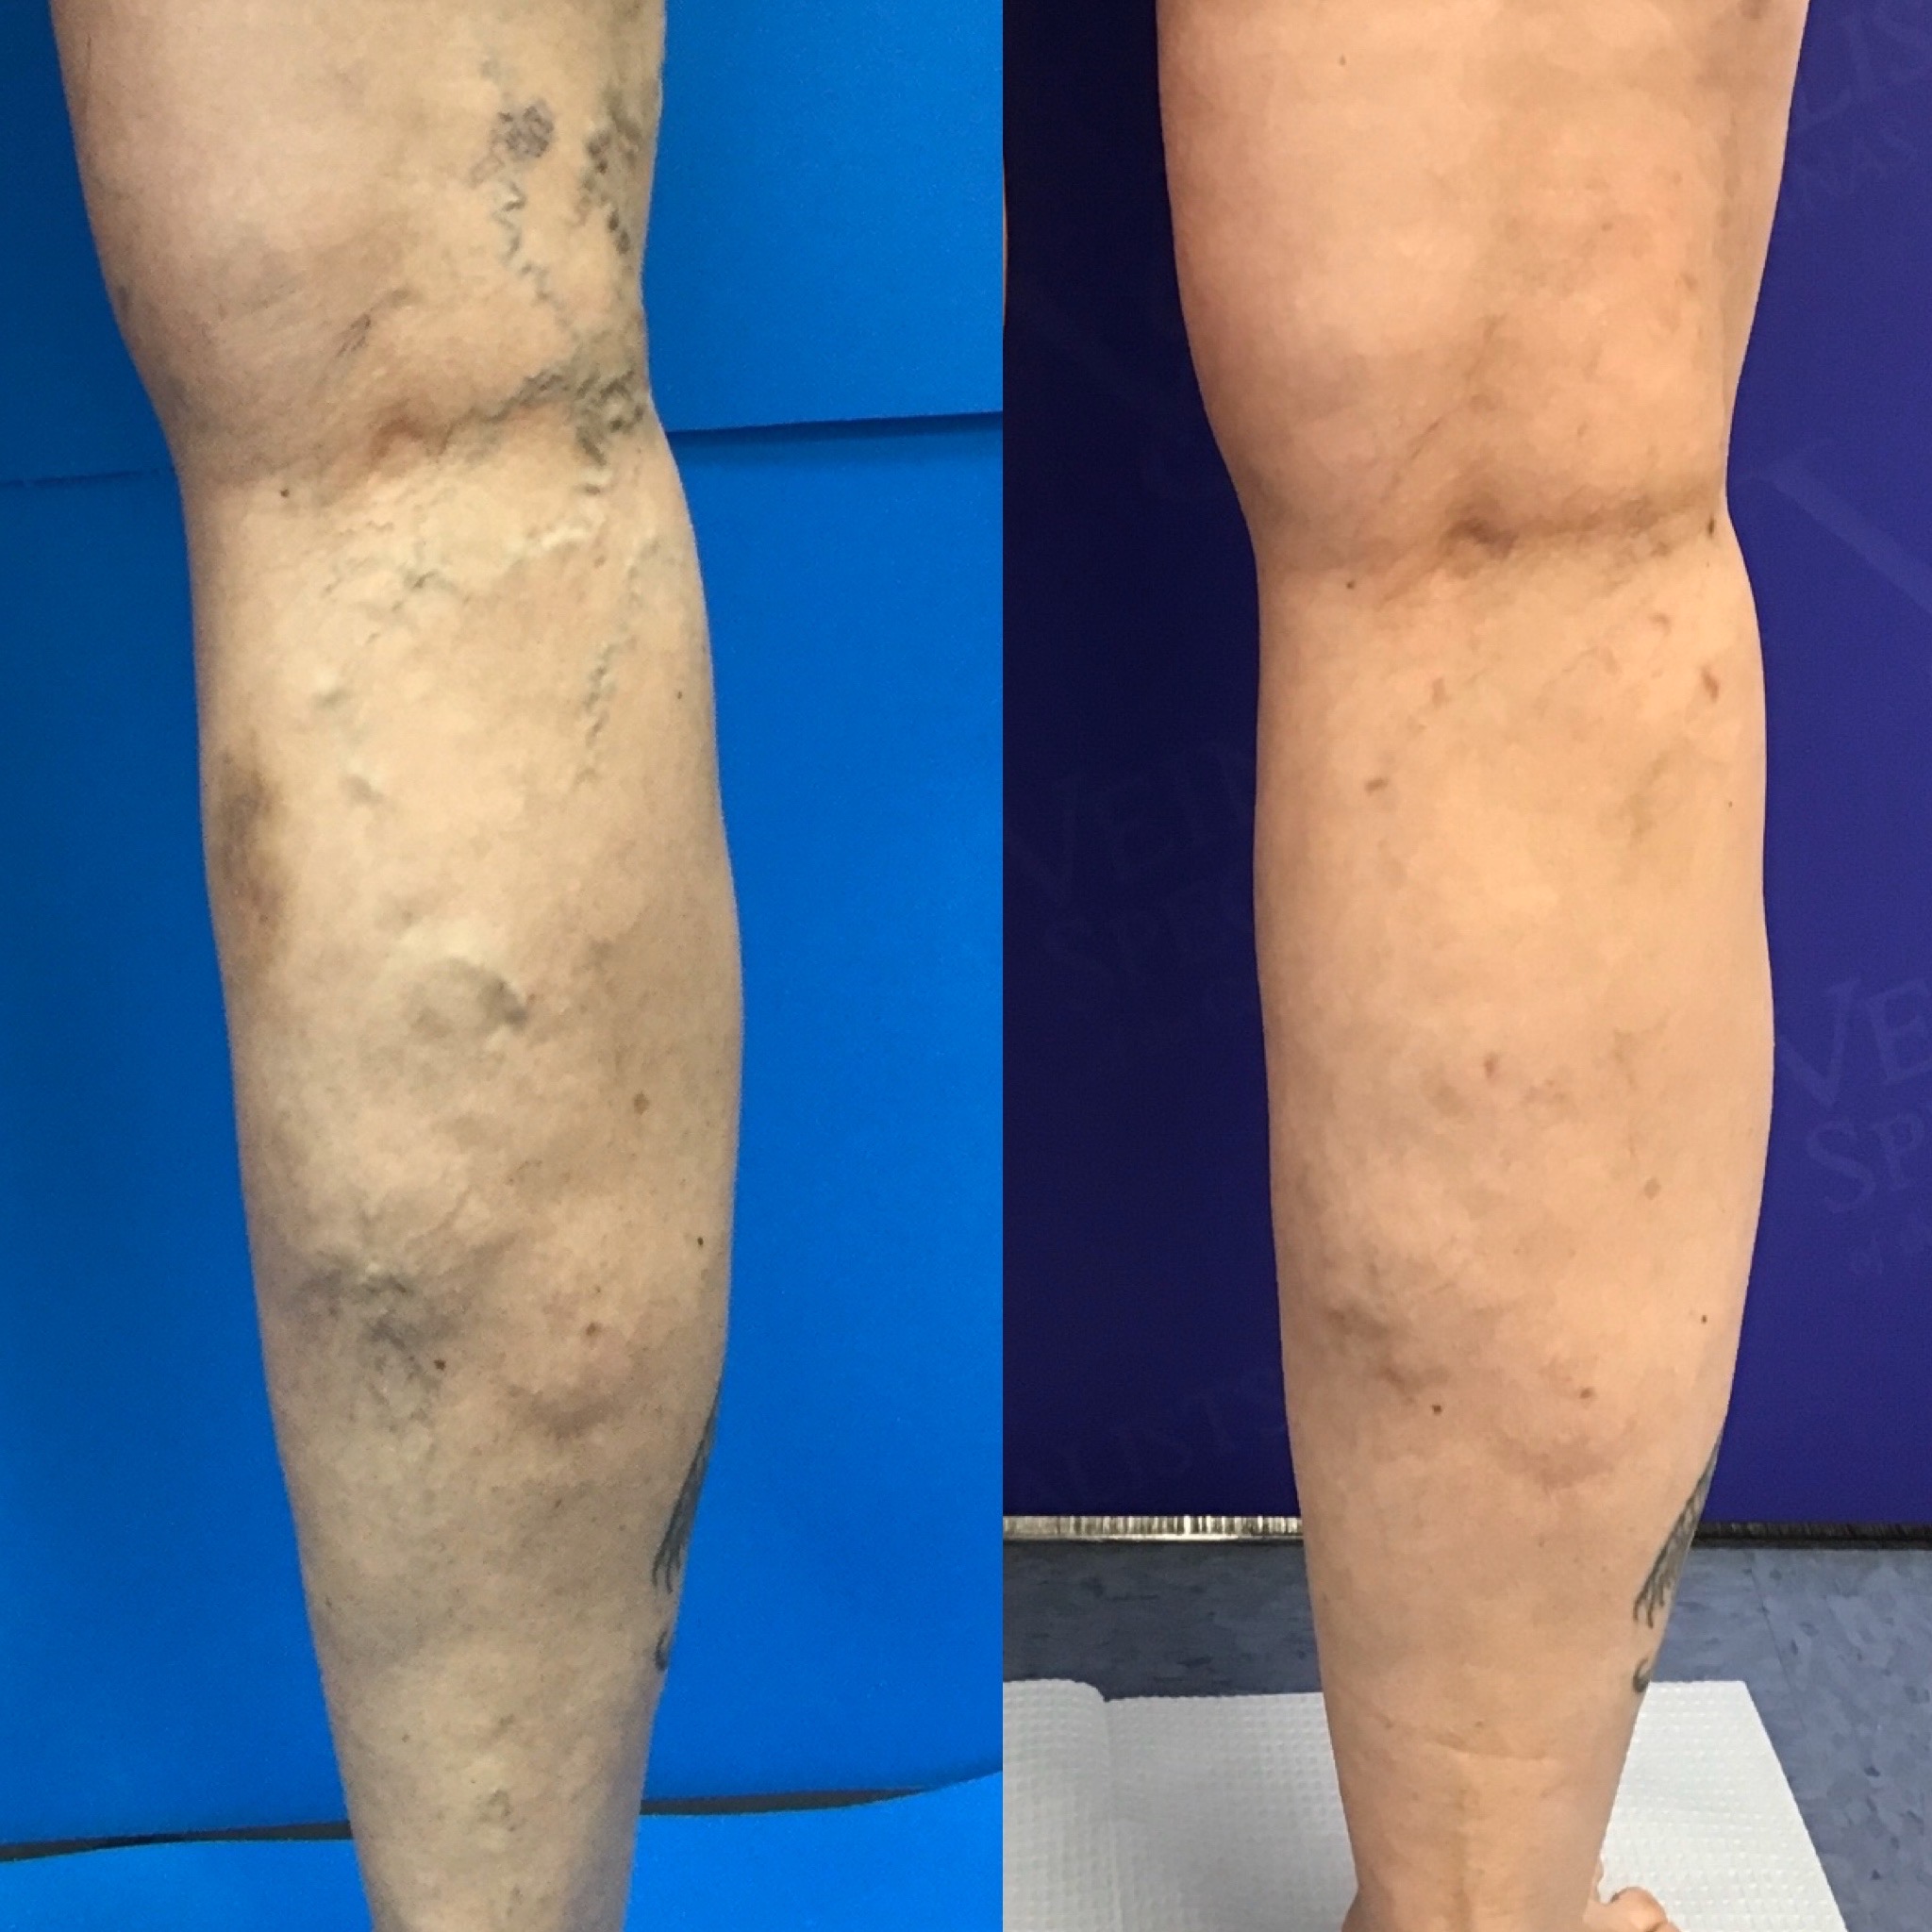 Causes of Spider Veins - Vein Specialists of the Carolinas